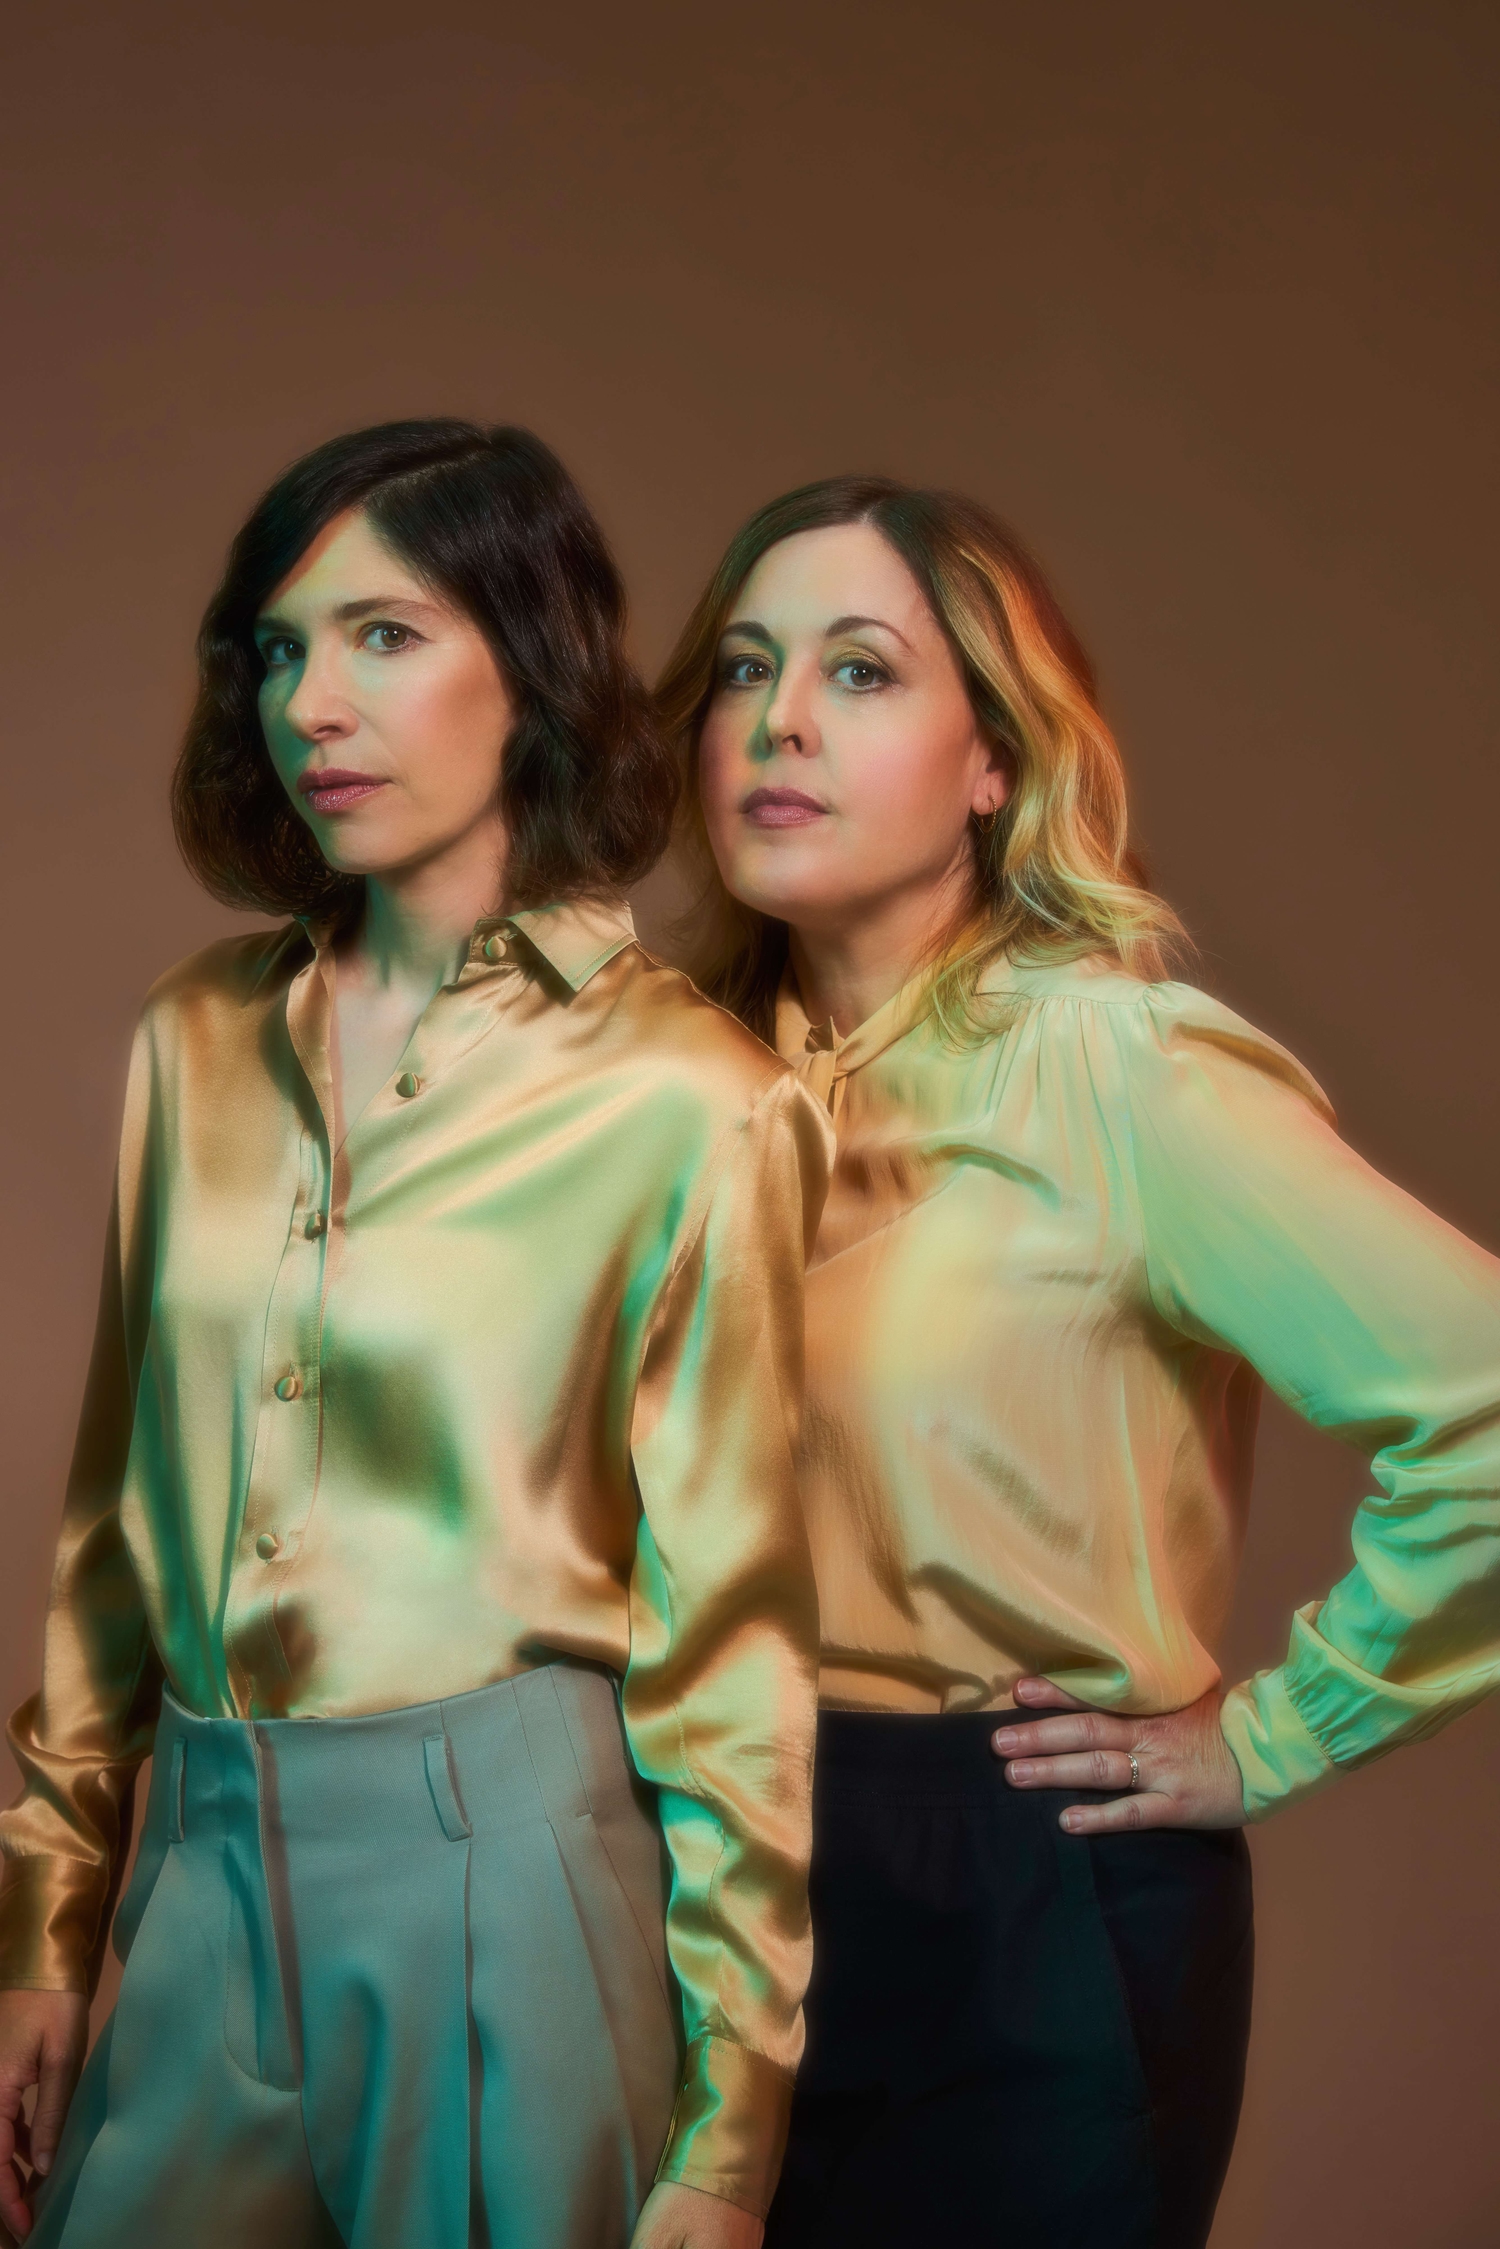 Sleater-Kinney reflect on personal tragedy in the lead up to new album 'Little Rope'